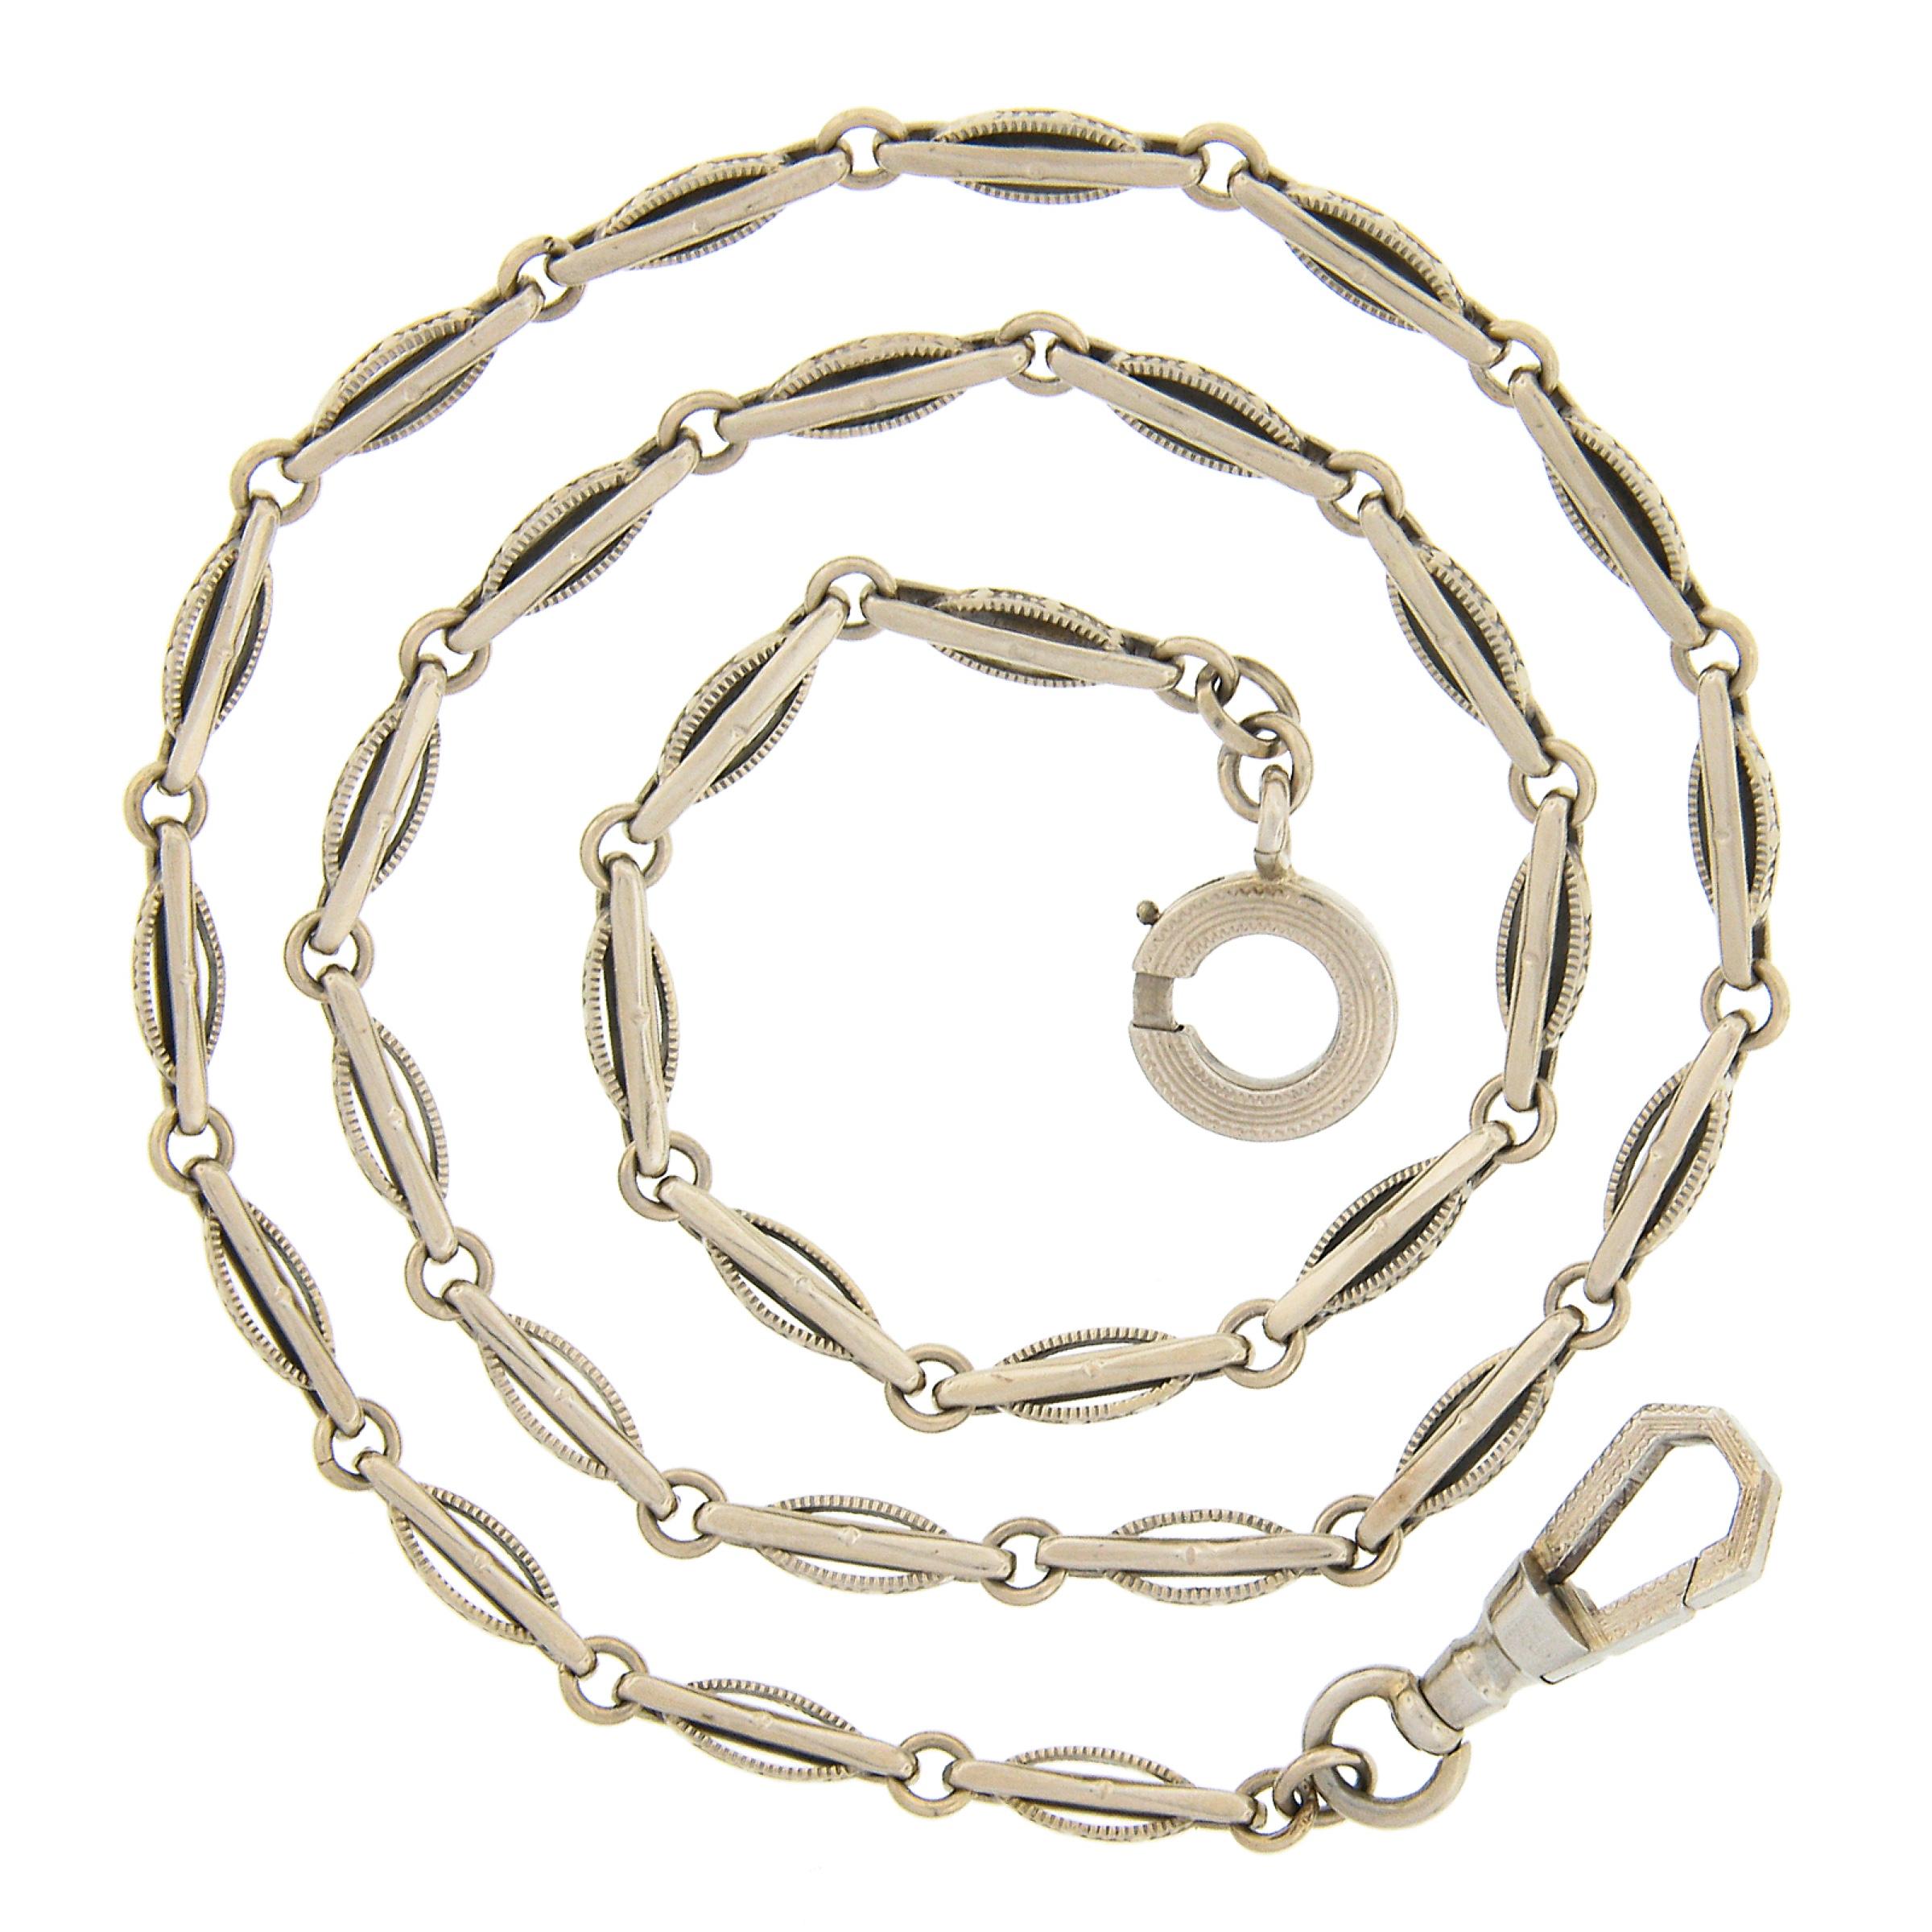 This beautiful antique art deco pocket watch chain was crafted from solid 14k White gold. It features delicate polished bars on uniquely etched ornate oval links. The chain measures 16 inches in length and is secured with a detailed & textured large